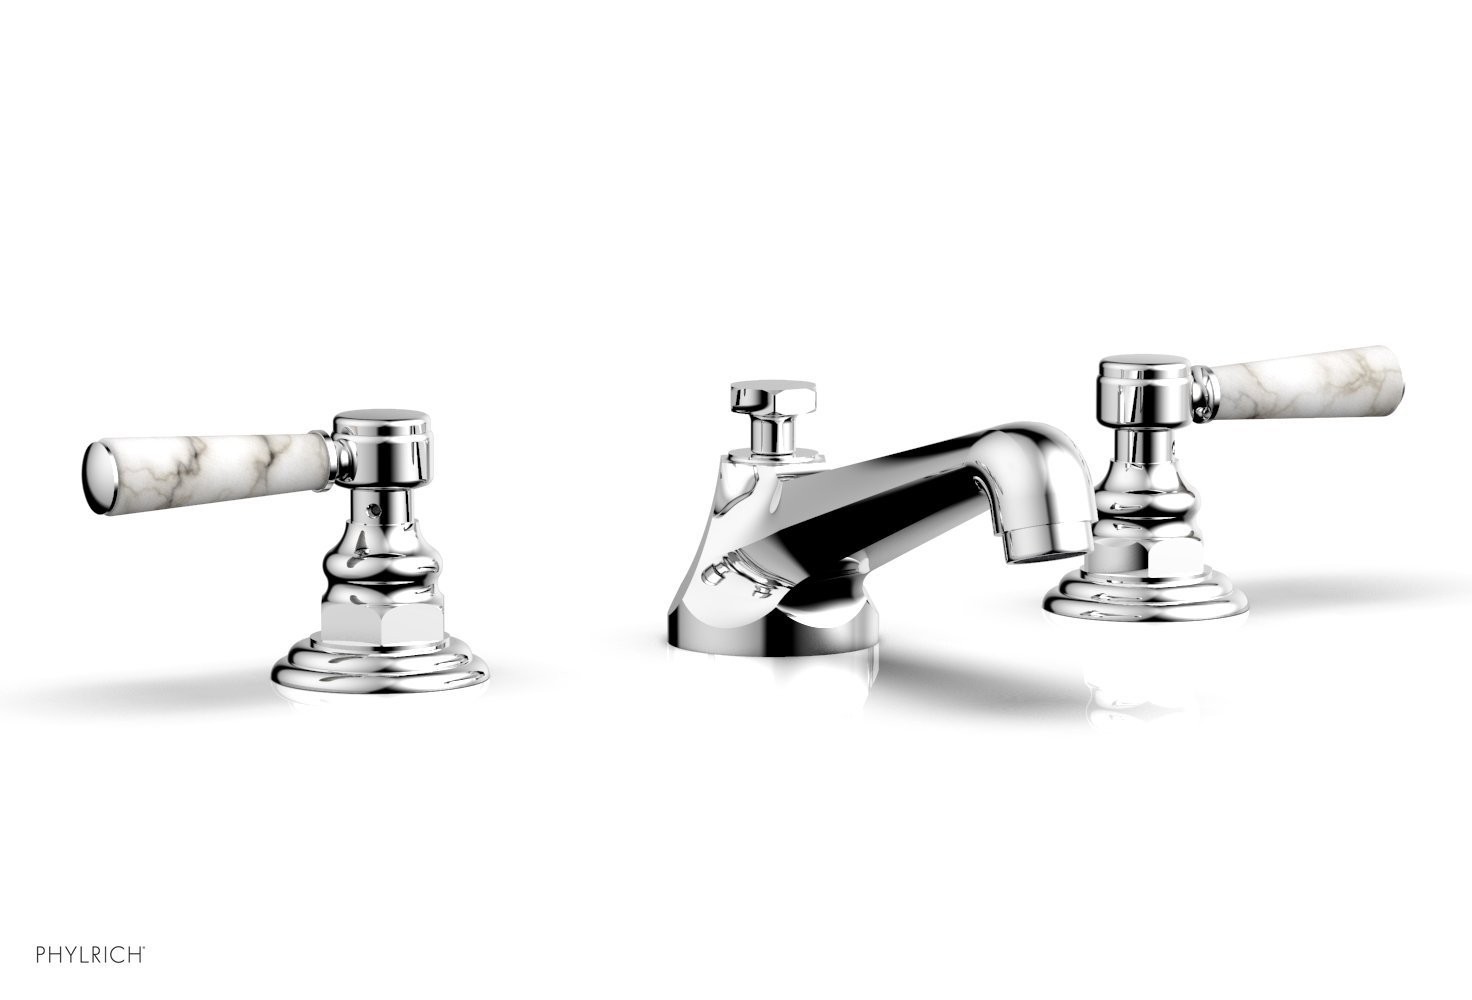 PHYLRICH 500-03-031 HEX TRADITIONAL THREE HOLE WIDESPREAD BATHROOM FAUCET WITH WHITE MARBLE LEVER HANDLES